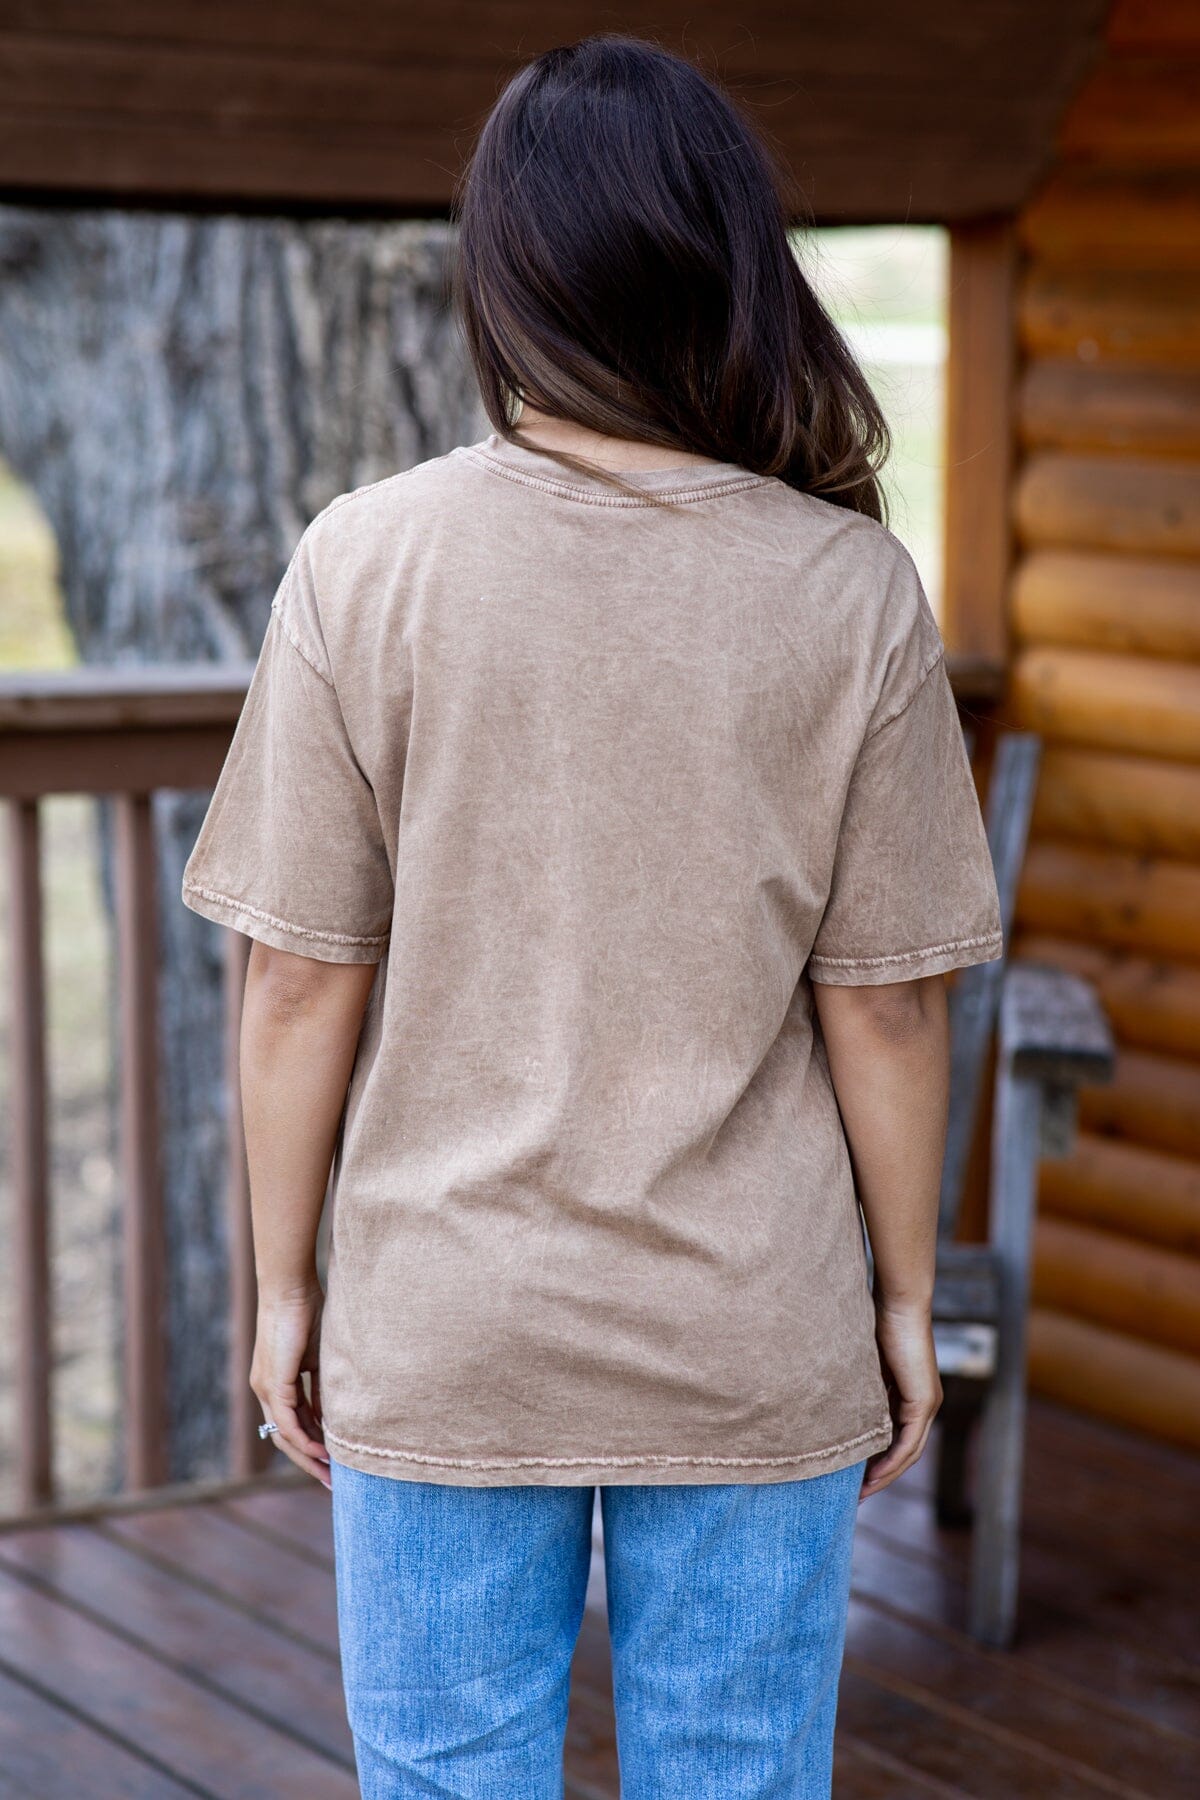 Taupe Washed Campfire Club Graphic Tee - Filly Flair